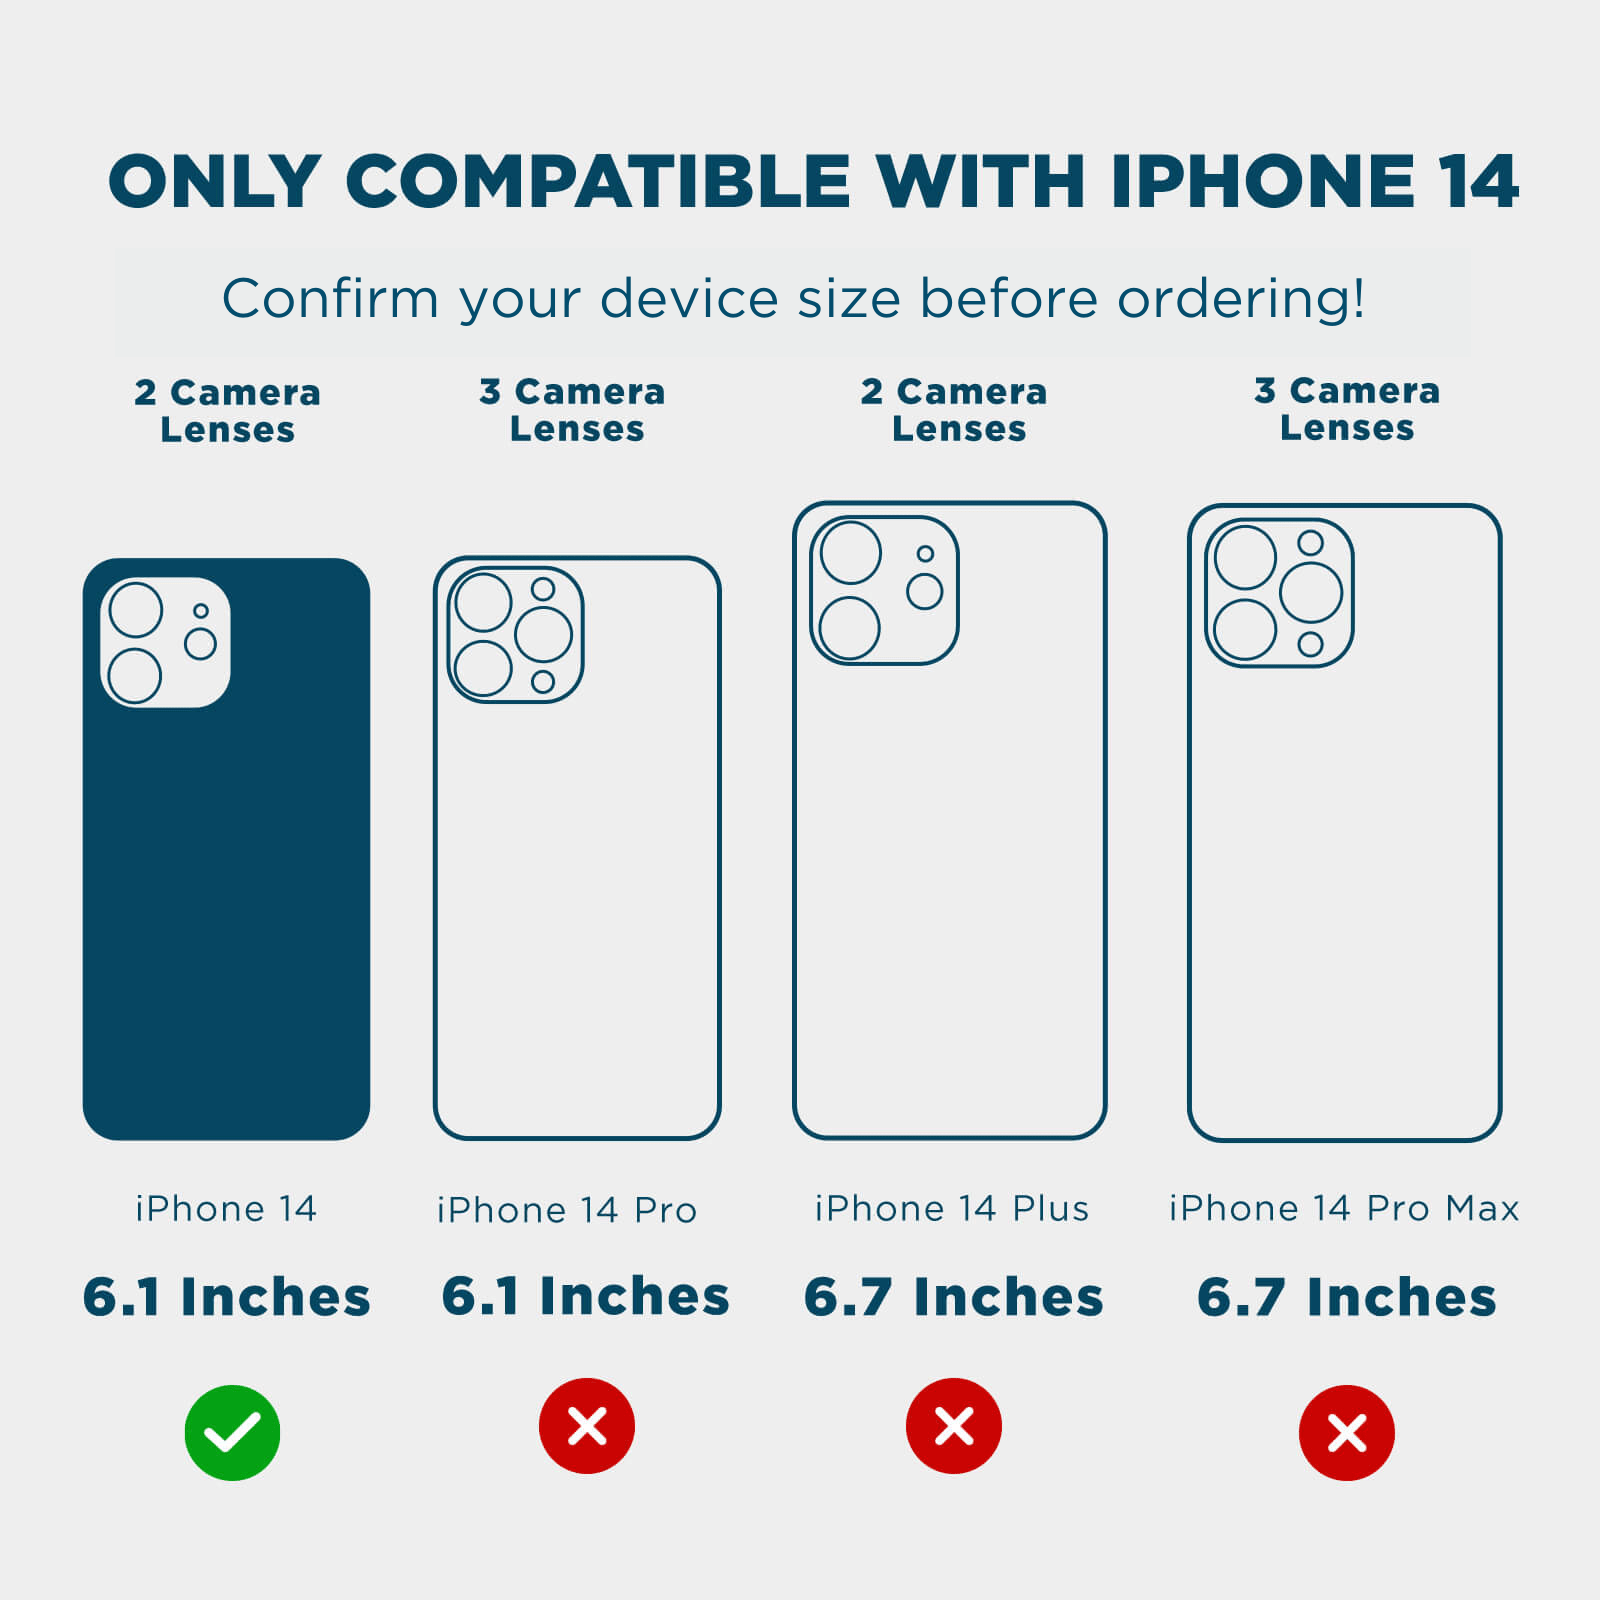 ONLY COMPATIBLE WITH IPHONE 14 CONFIRM YOUR DEVICE SIZE BEFORE ORDERING! 2 CAMERA LENSES, 3 CAMERA LENSES, 2 CAMERA LENSES, 3 CAMERA LENSES. IPHONE 14 6.1" IPHONE 14 PRO 6.1" IPHONE 14 PLUS 6.7" IPHONE 14 PRO MAX 6.7". COLOR::TWINKLE DIAMOND